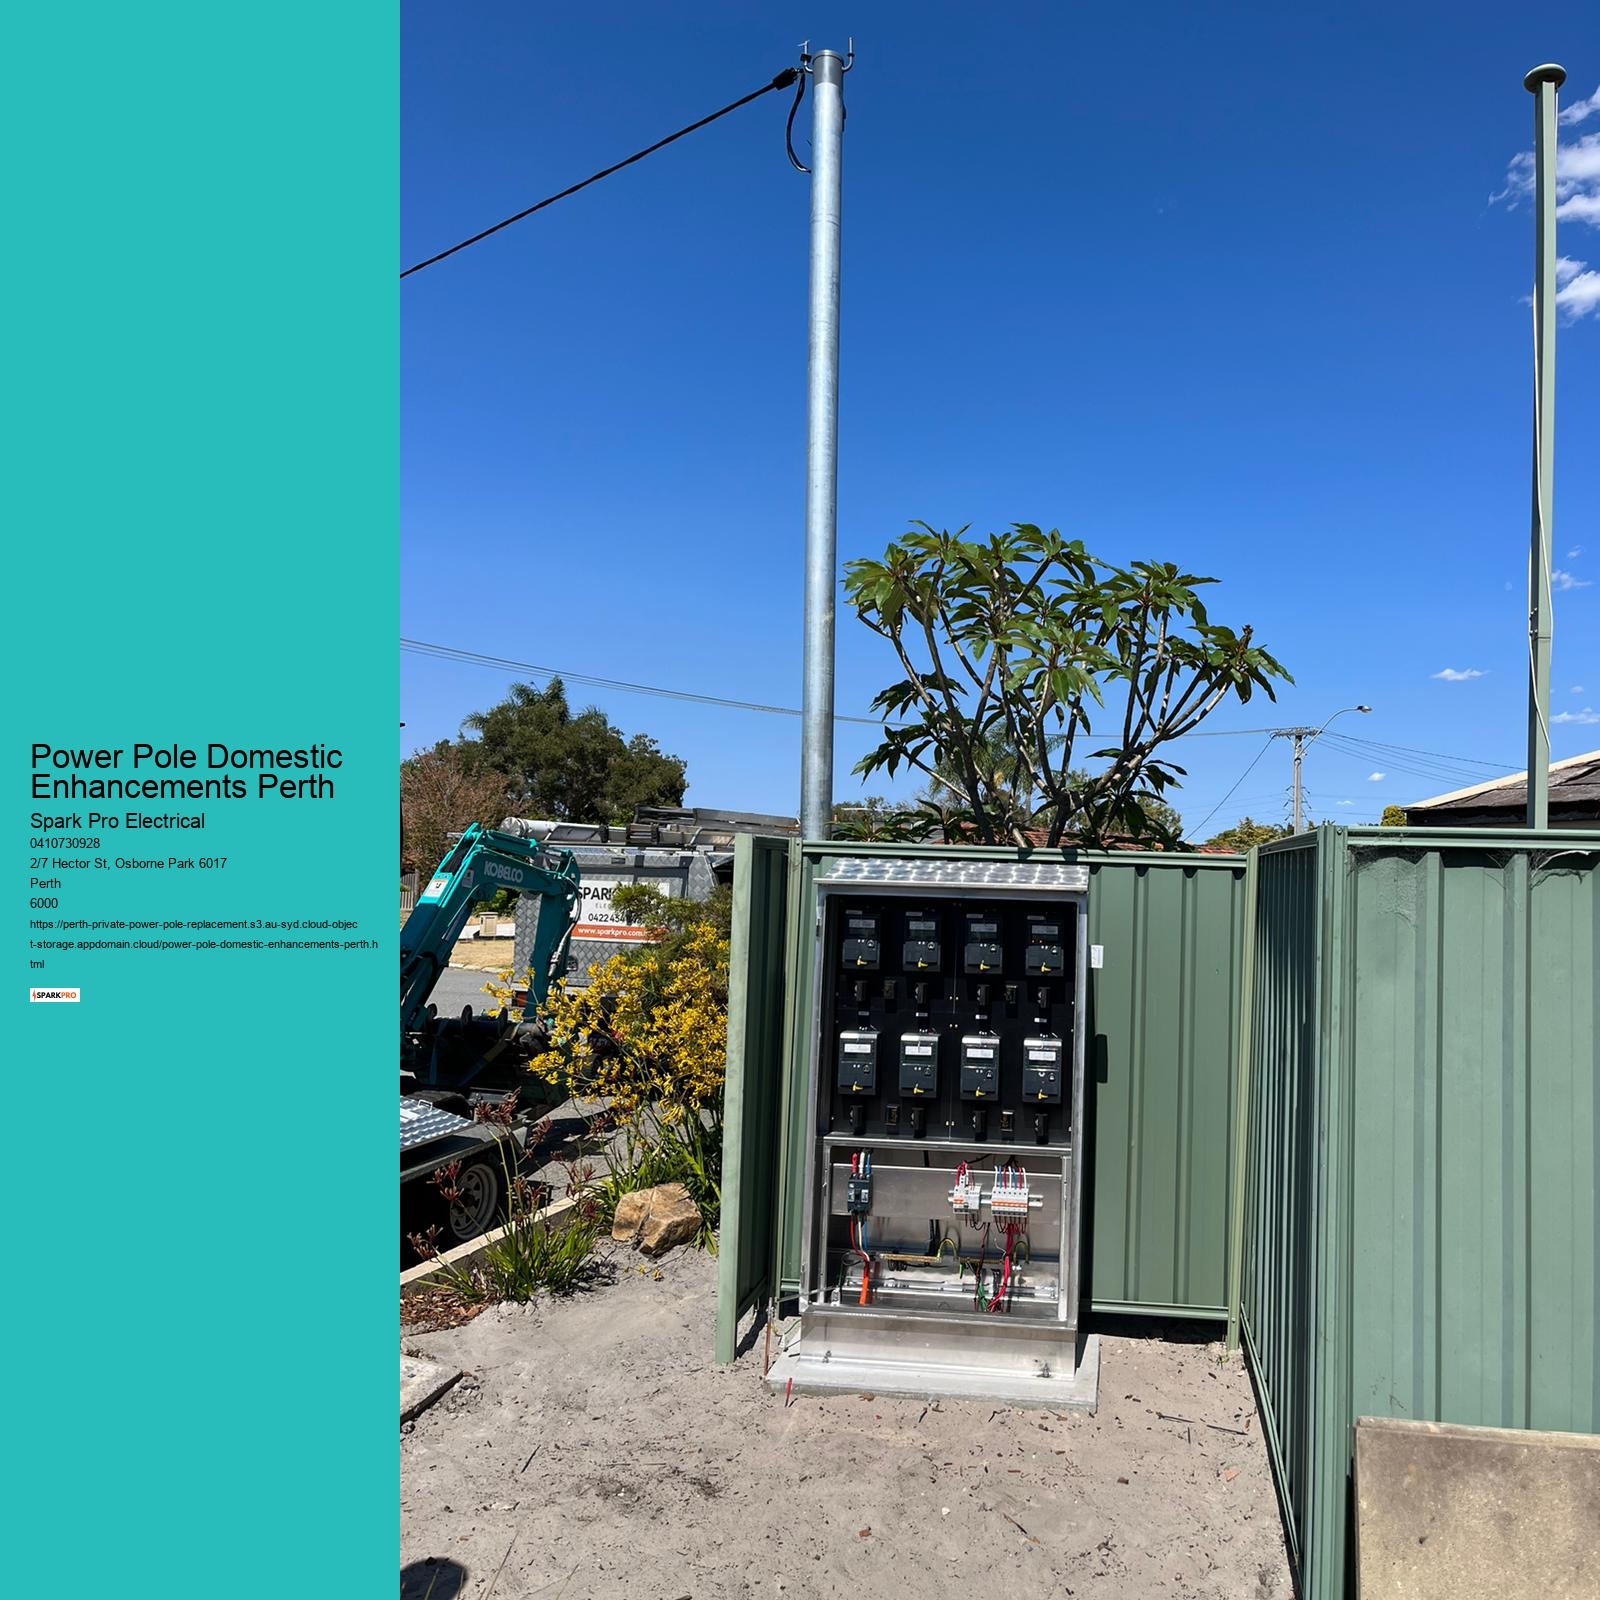 Specialised Power Pole Replacement for Perth